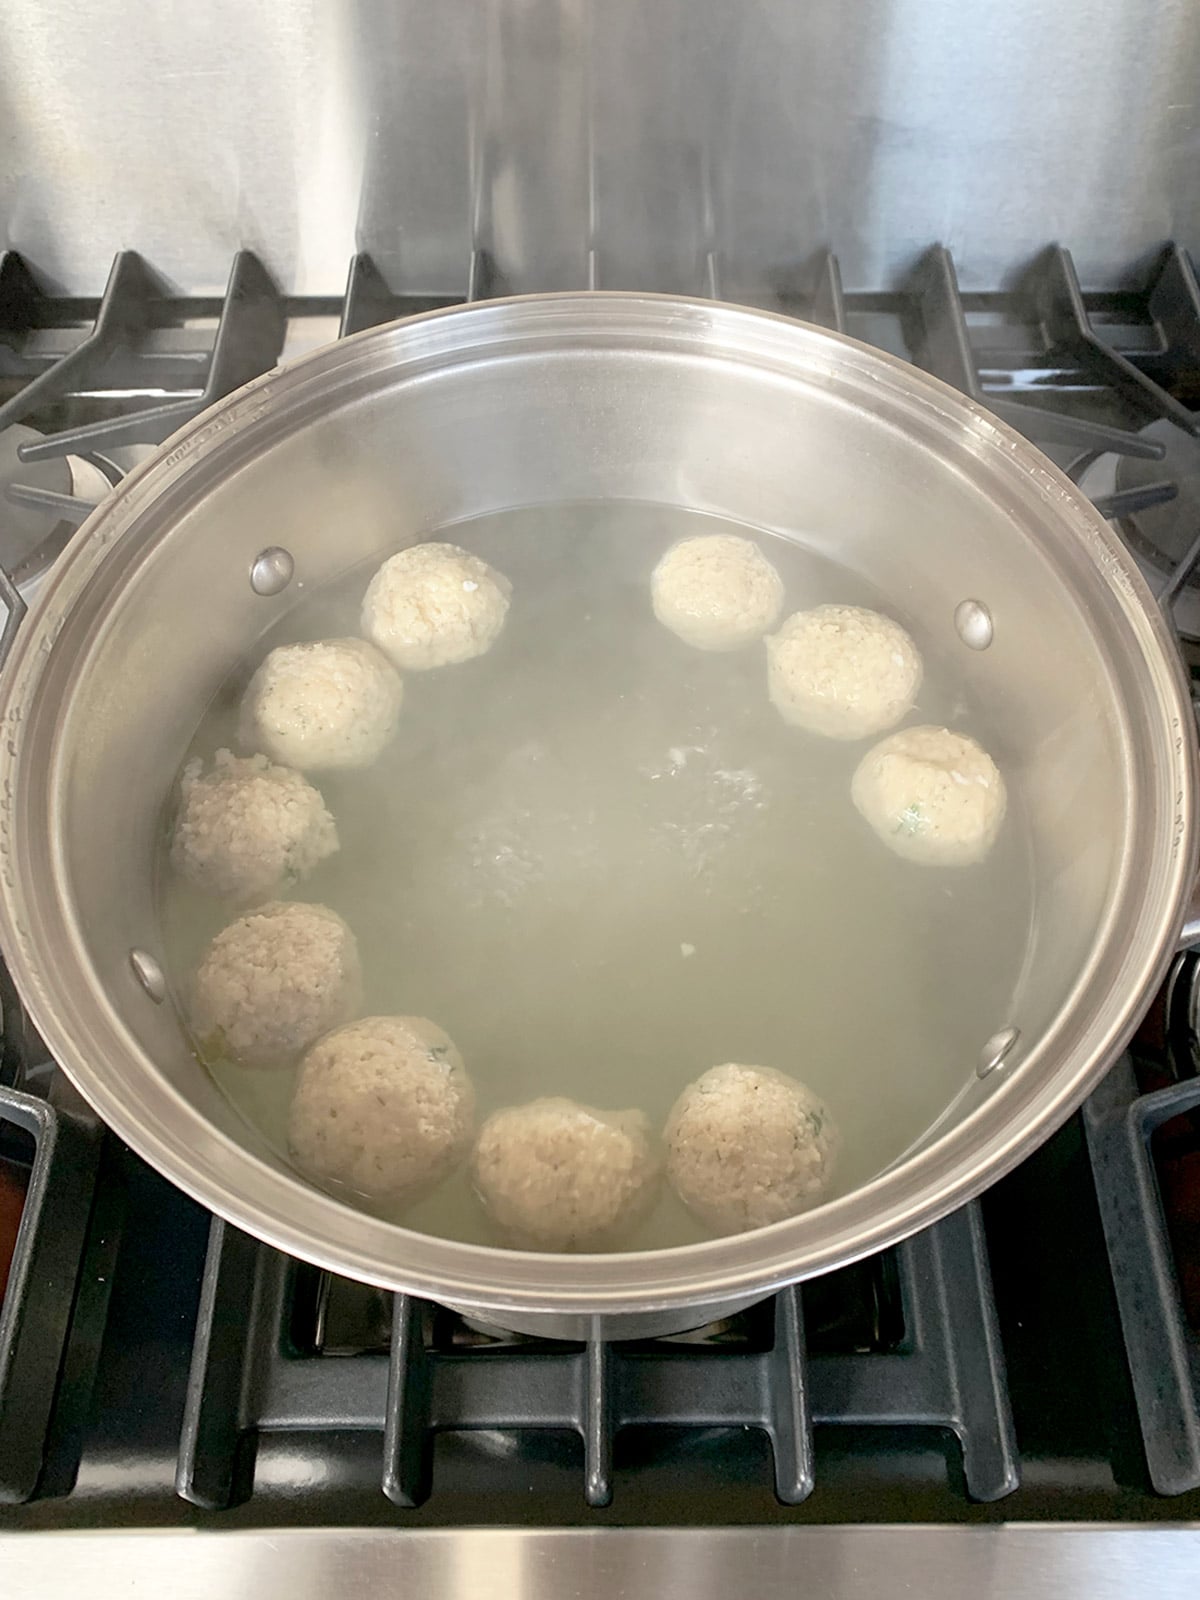 Matzo ball pot uncovered with balls ready to check for doneness.